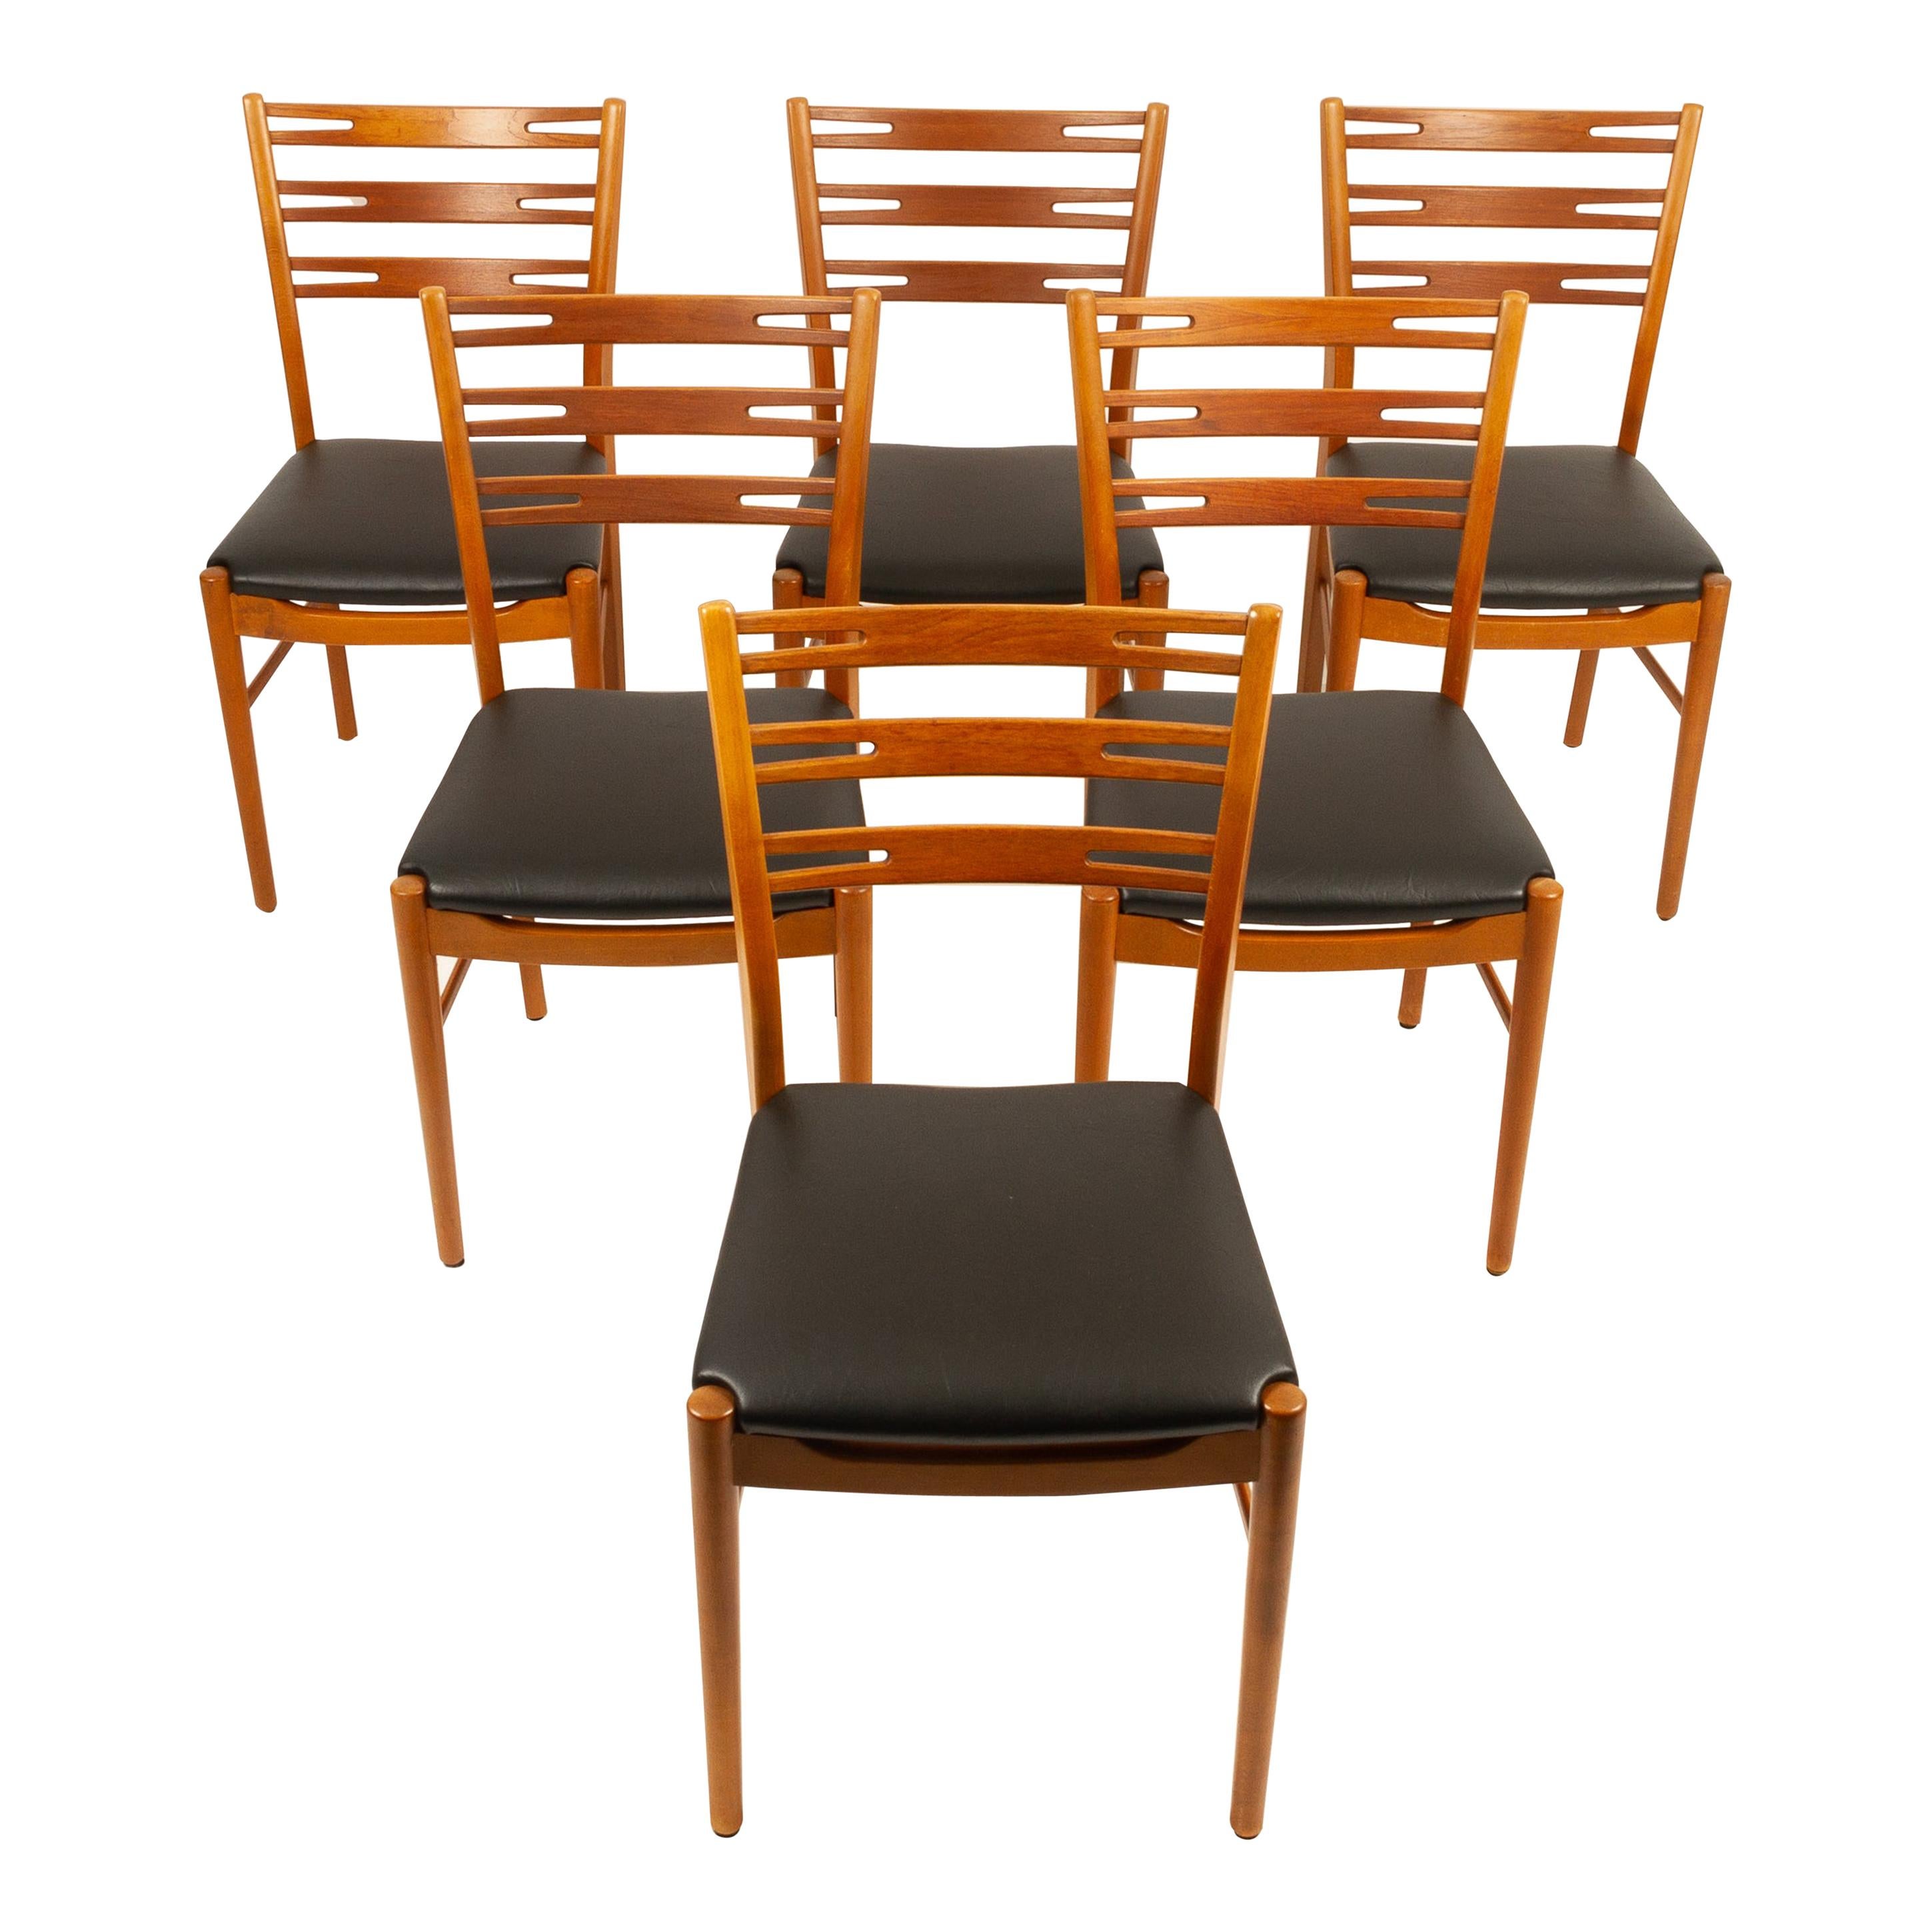 Vintage Farstrup Chairs in Teak and Beech, Set of 6